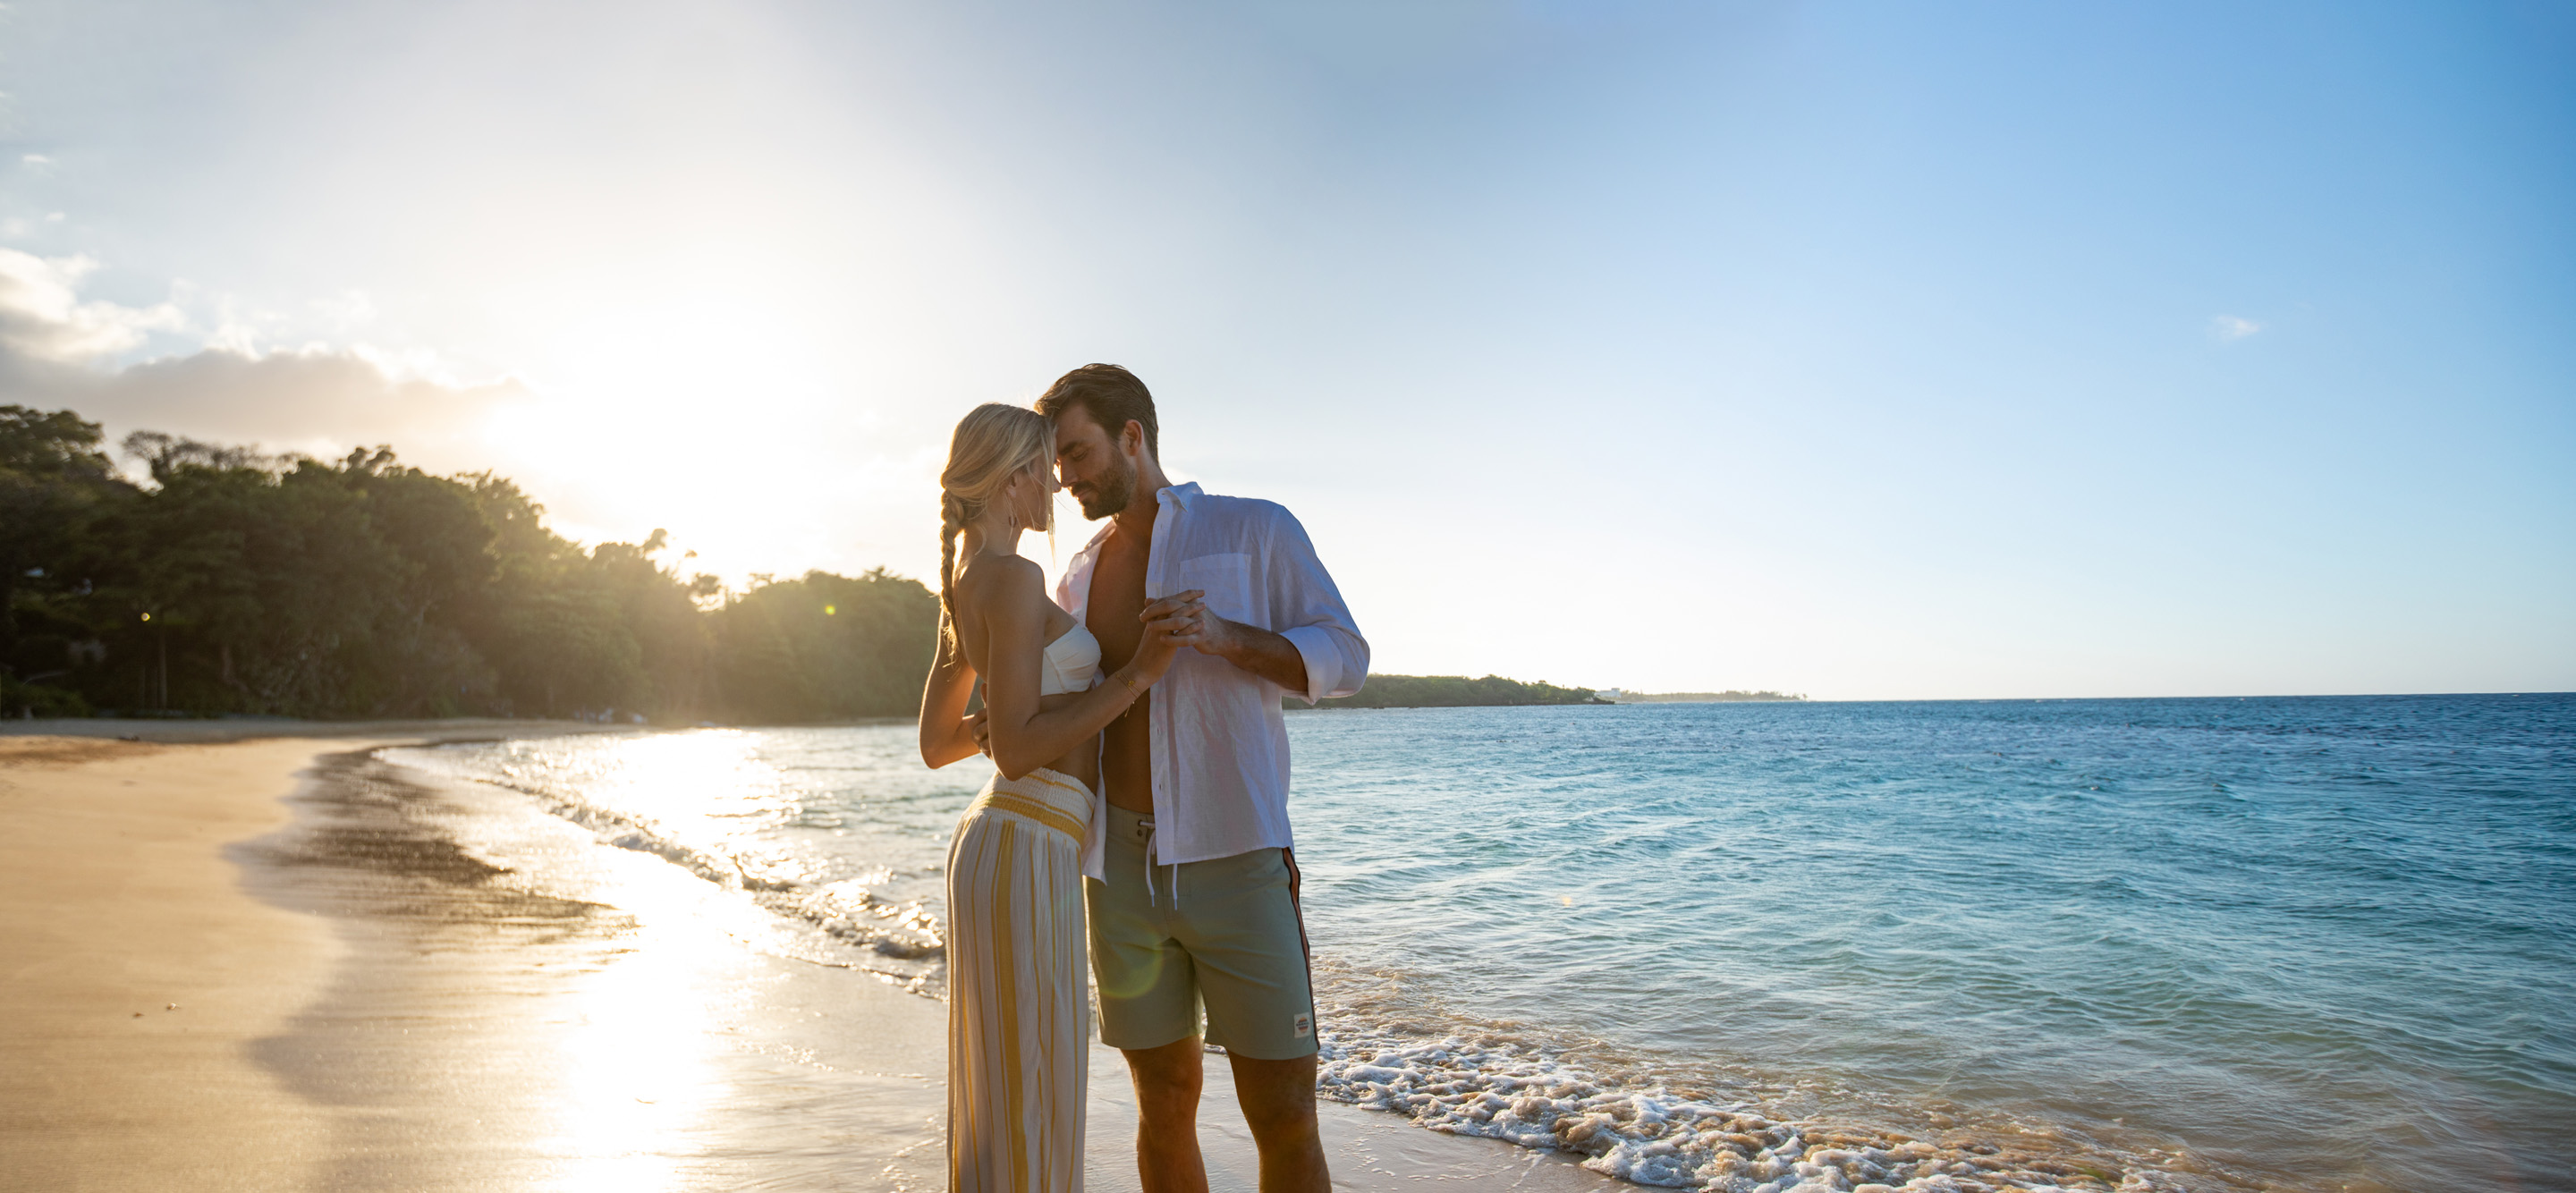 Honeymoon Planning: When and How to Book Your Honeymoon